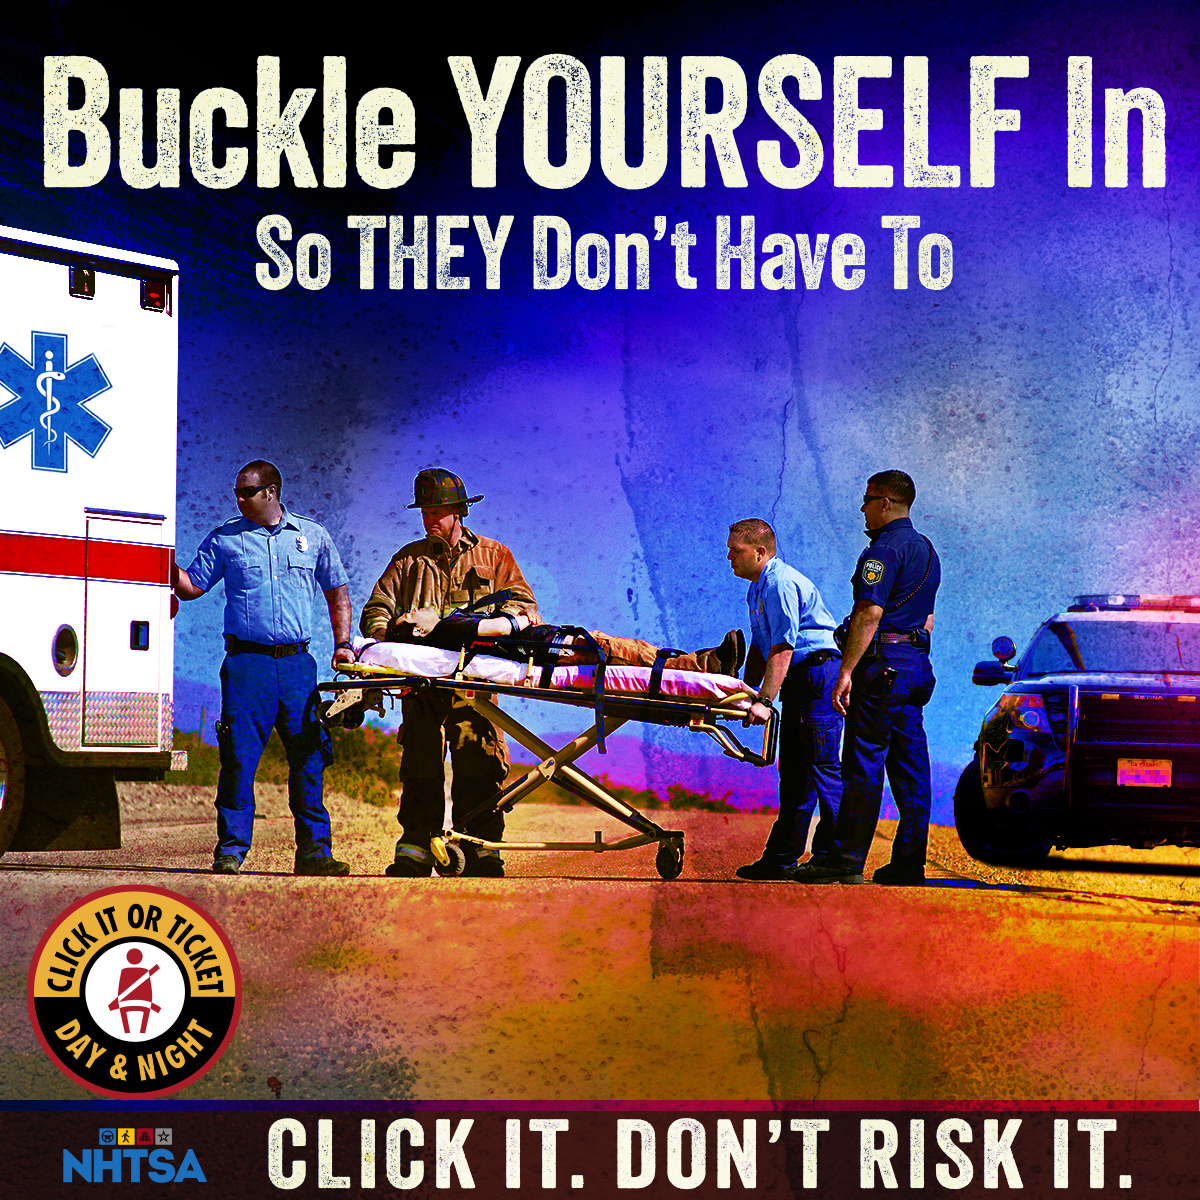 Buckle yourself in so they don't have to.  Learn more about the click it or ticket initiative.